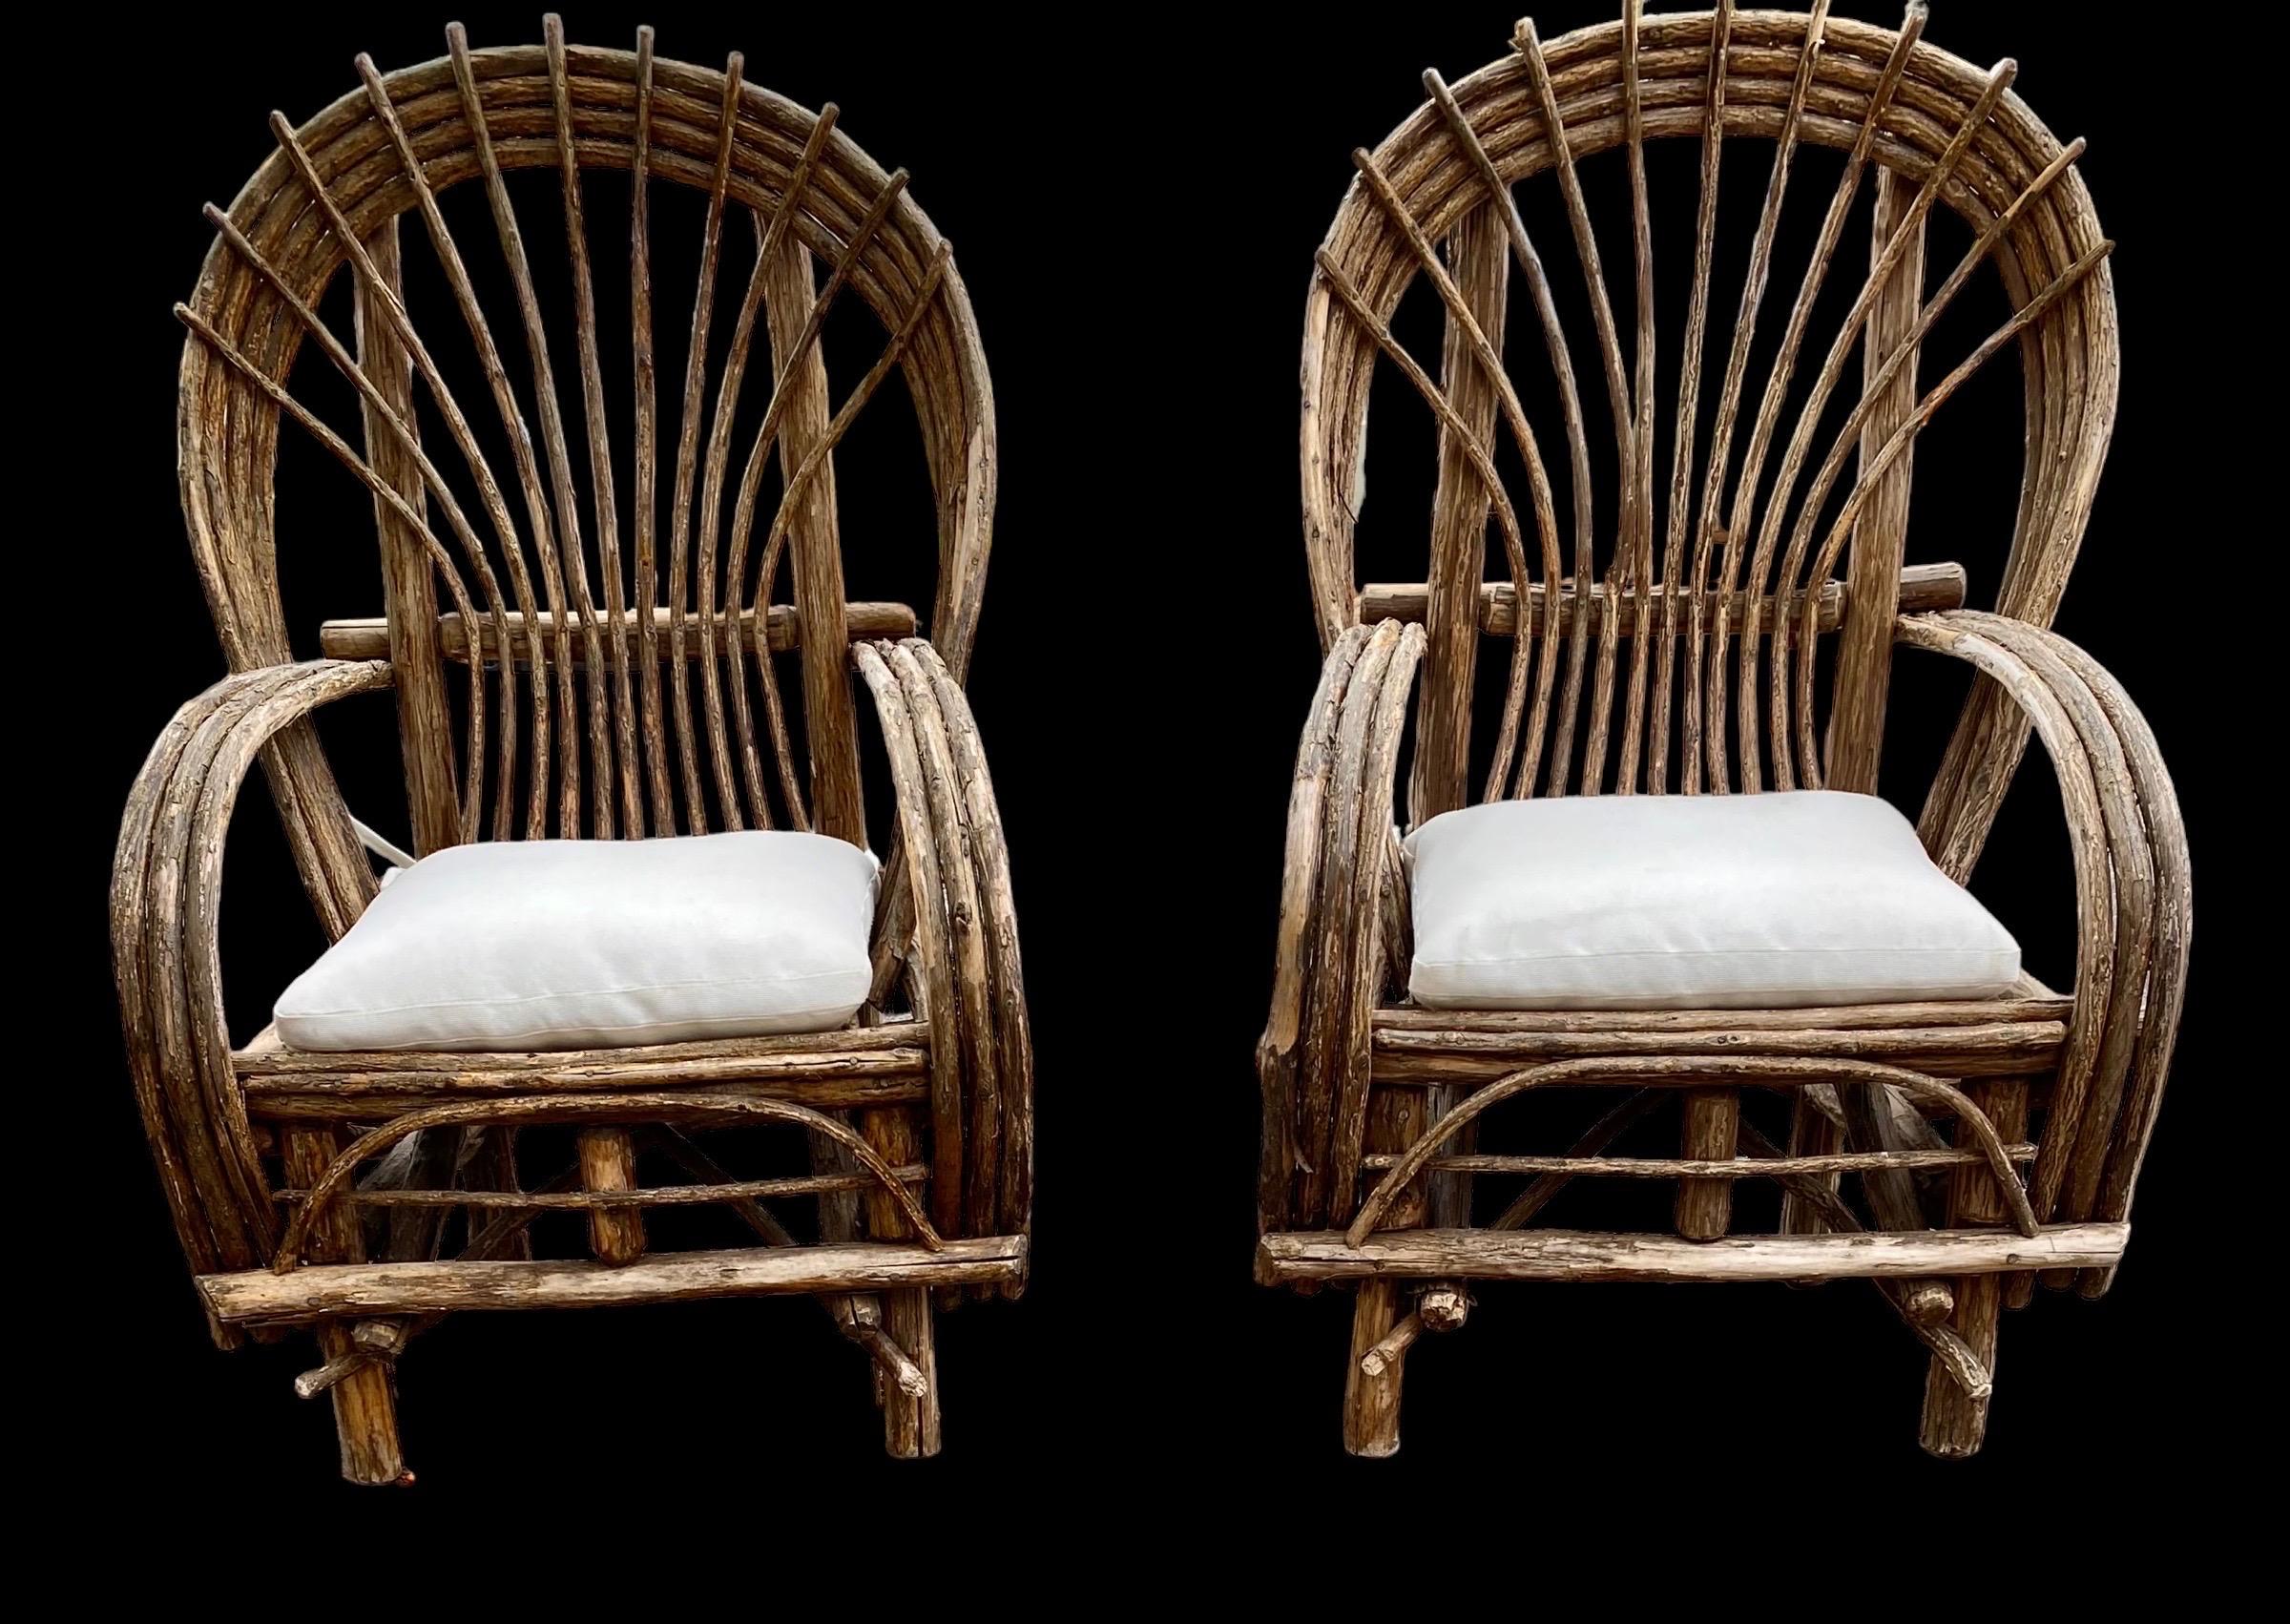 Hand-Crafted Pair of Hade Crafted Bent Willow Rustic Arm Chairs